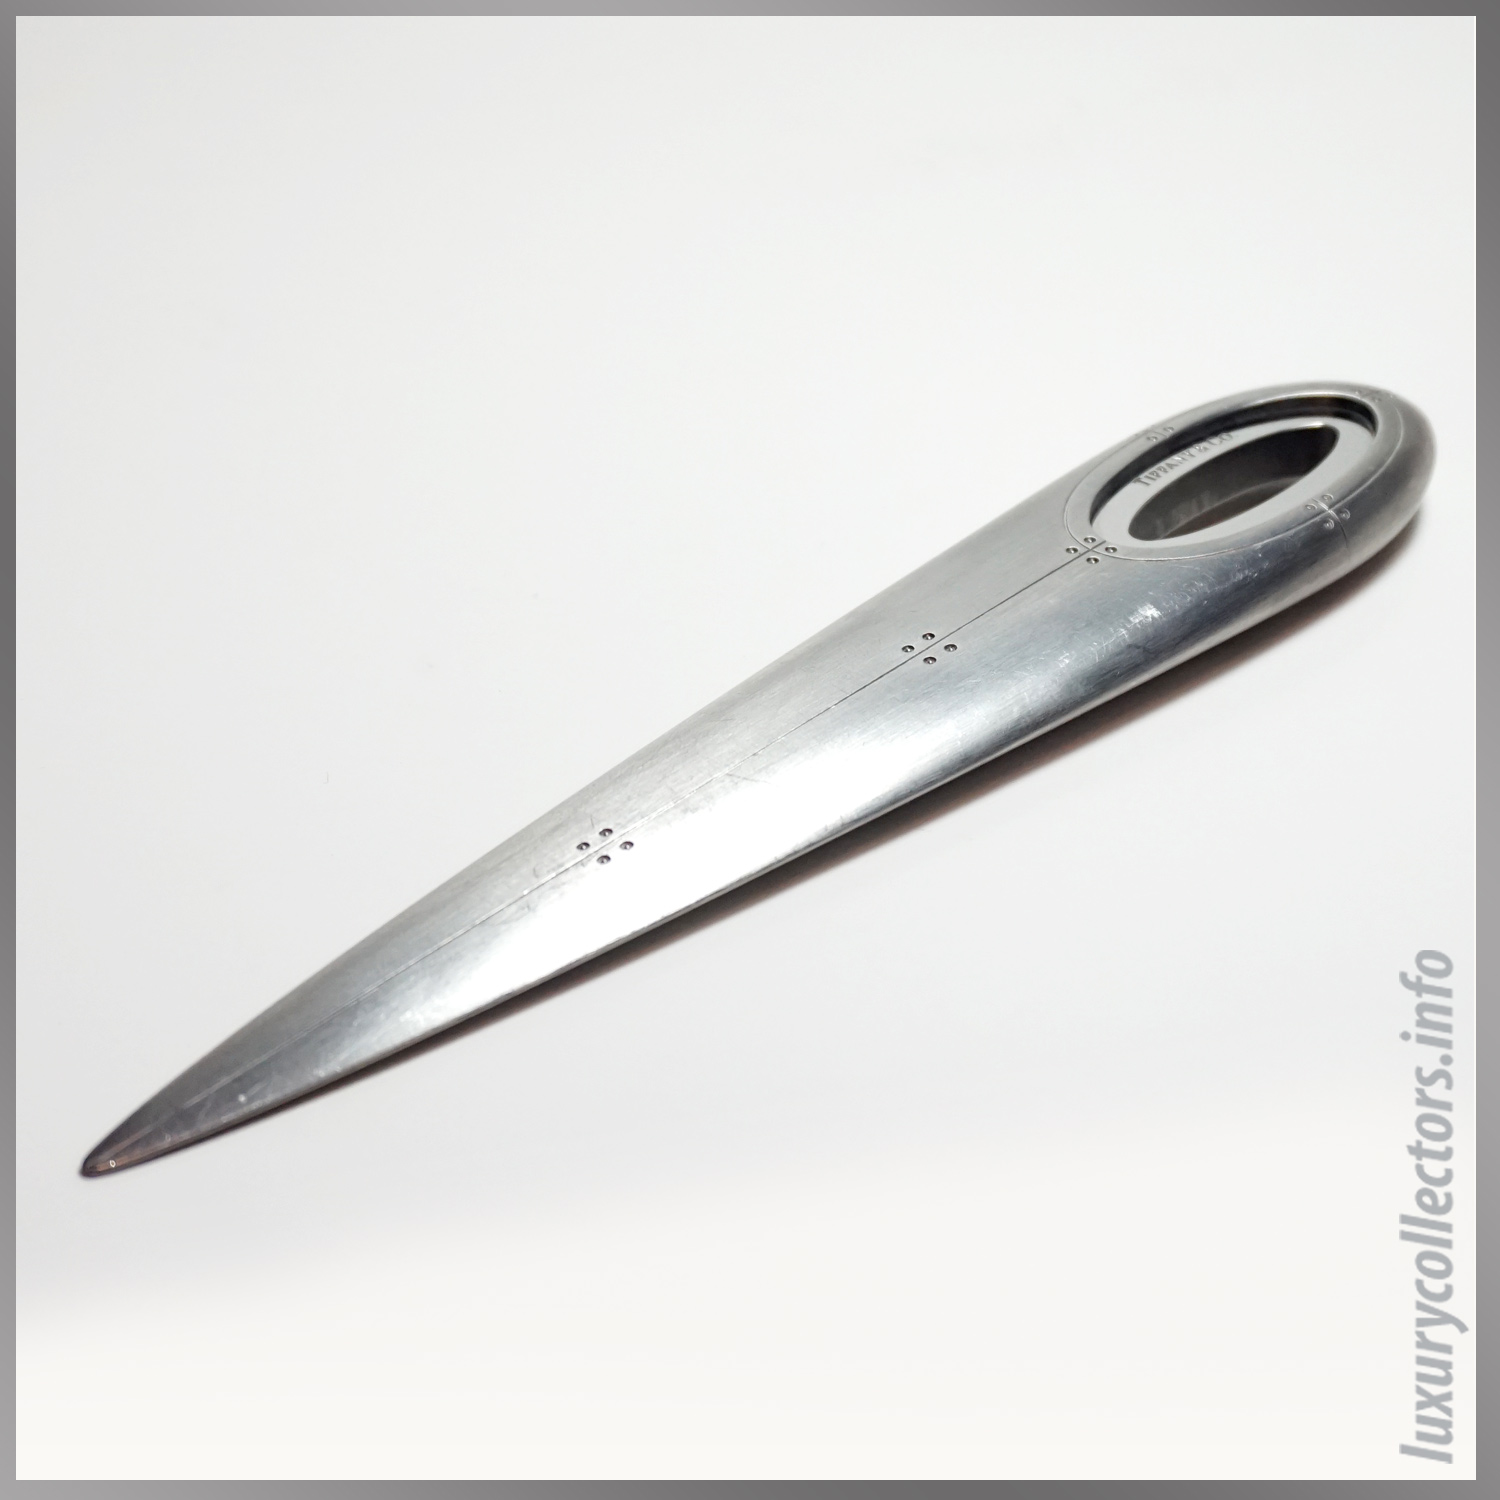 Tiffany & and Co. Streamerica Stainless Steel Trylon Letter Opener Desk Home Collection Office